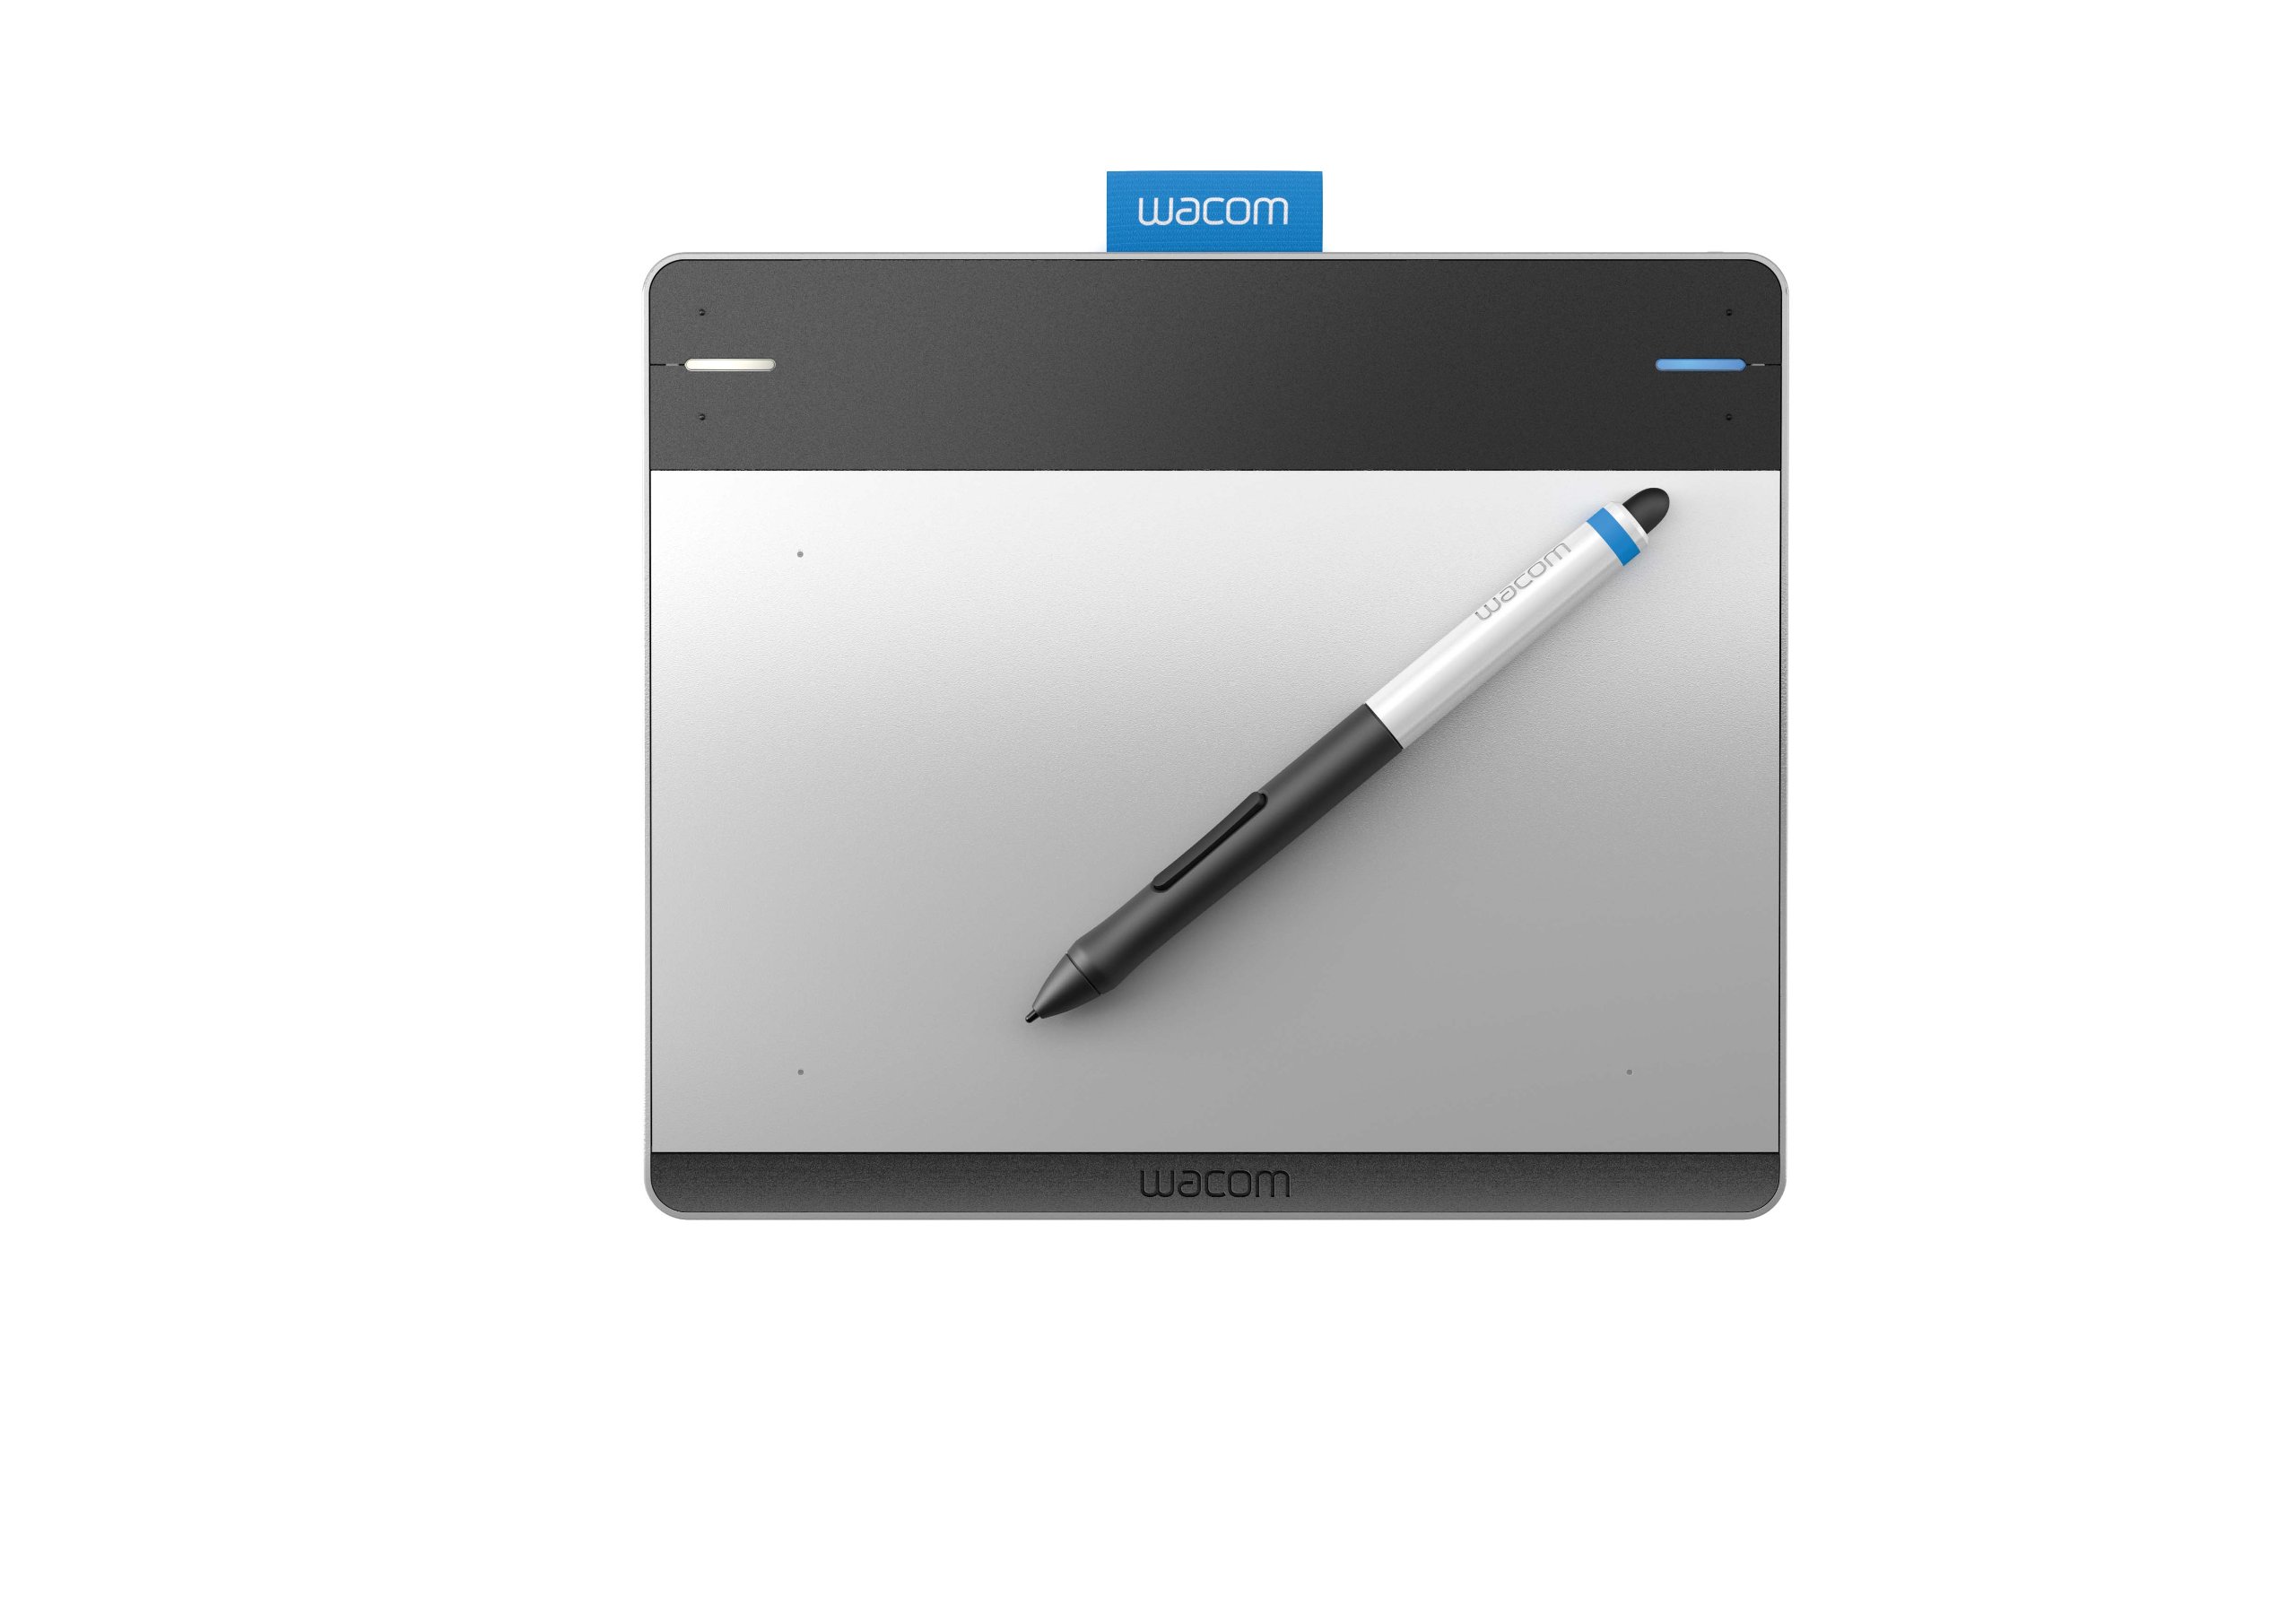 wacom intuos pen and touch small installation